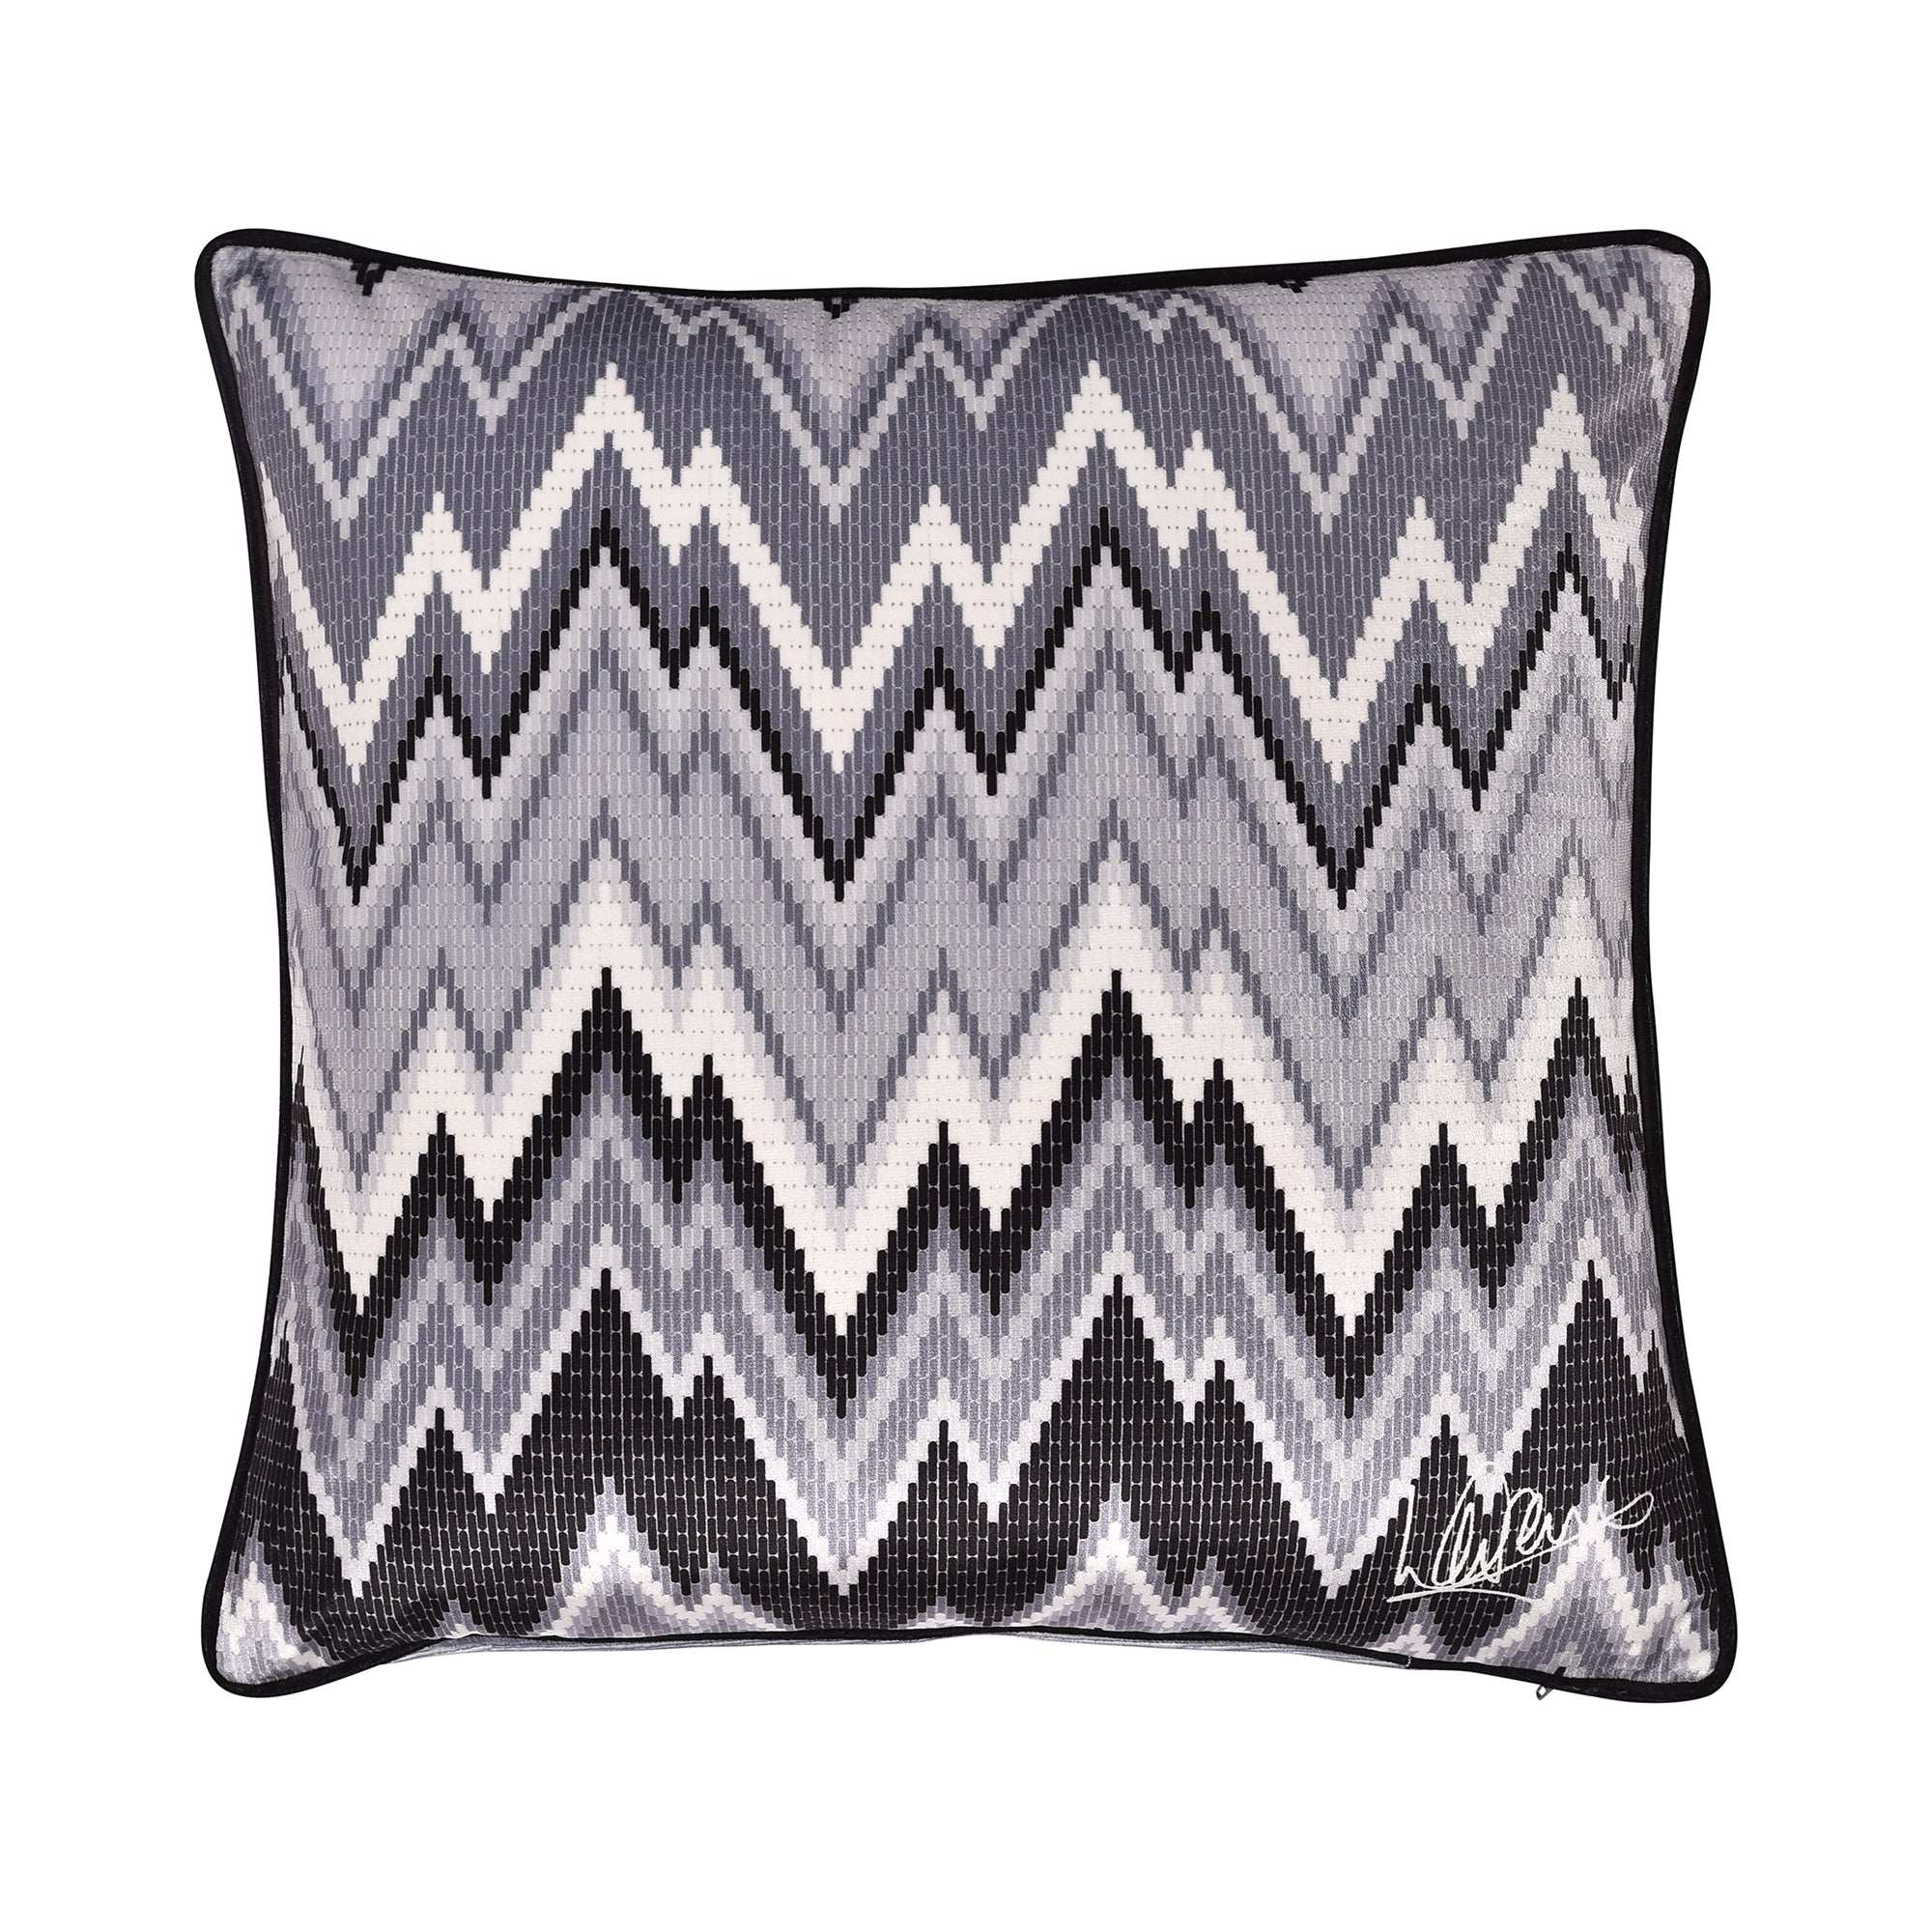 Filled Cushion Pants on Fire by Laurence Llewelyn-Bowen in Black/White